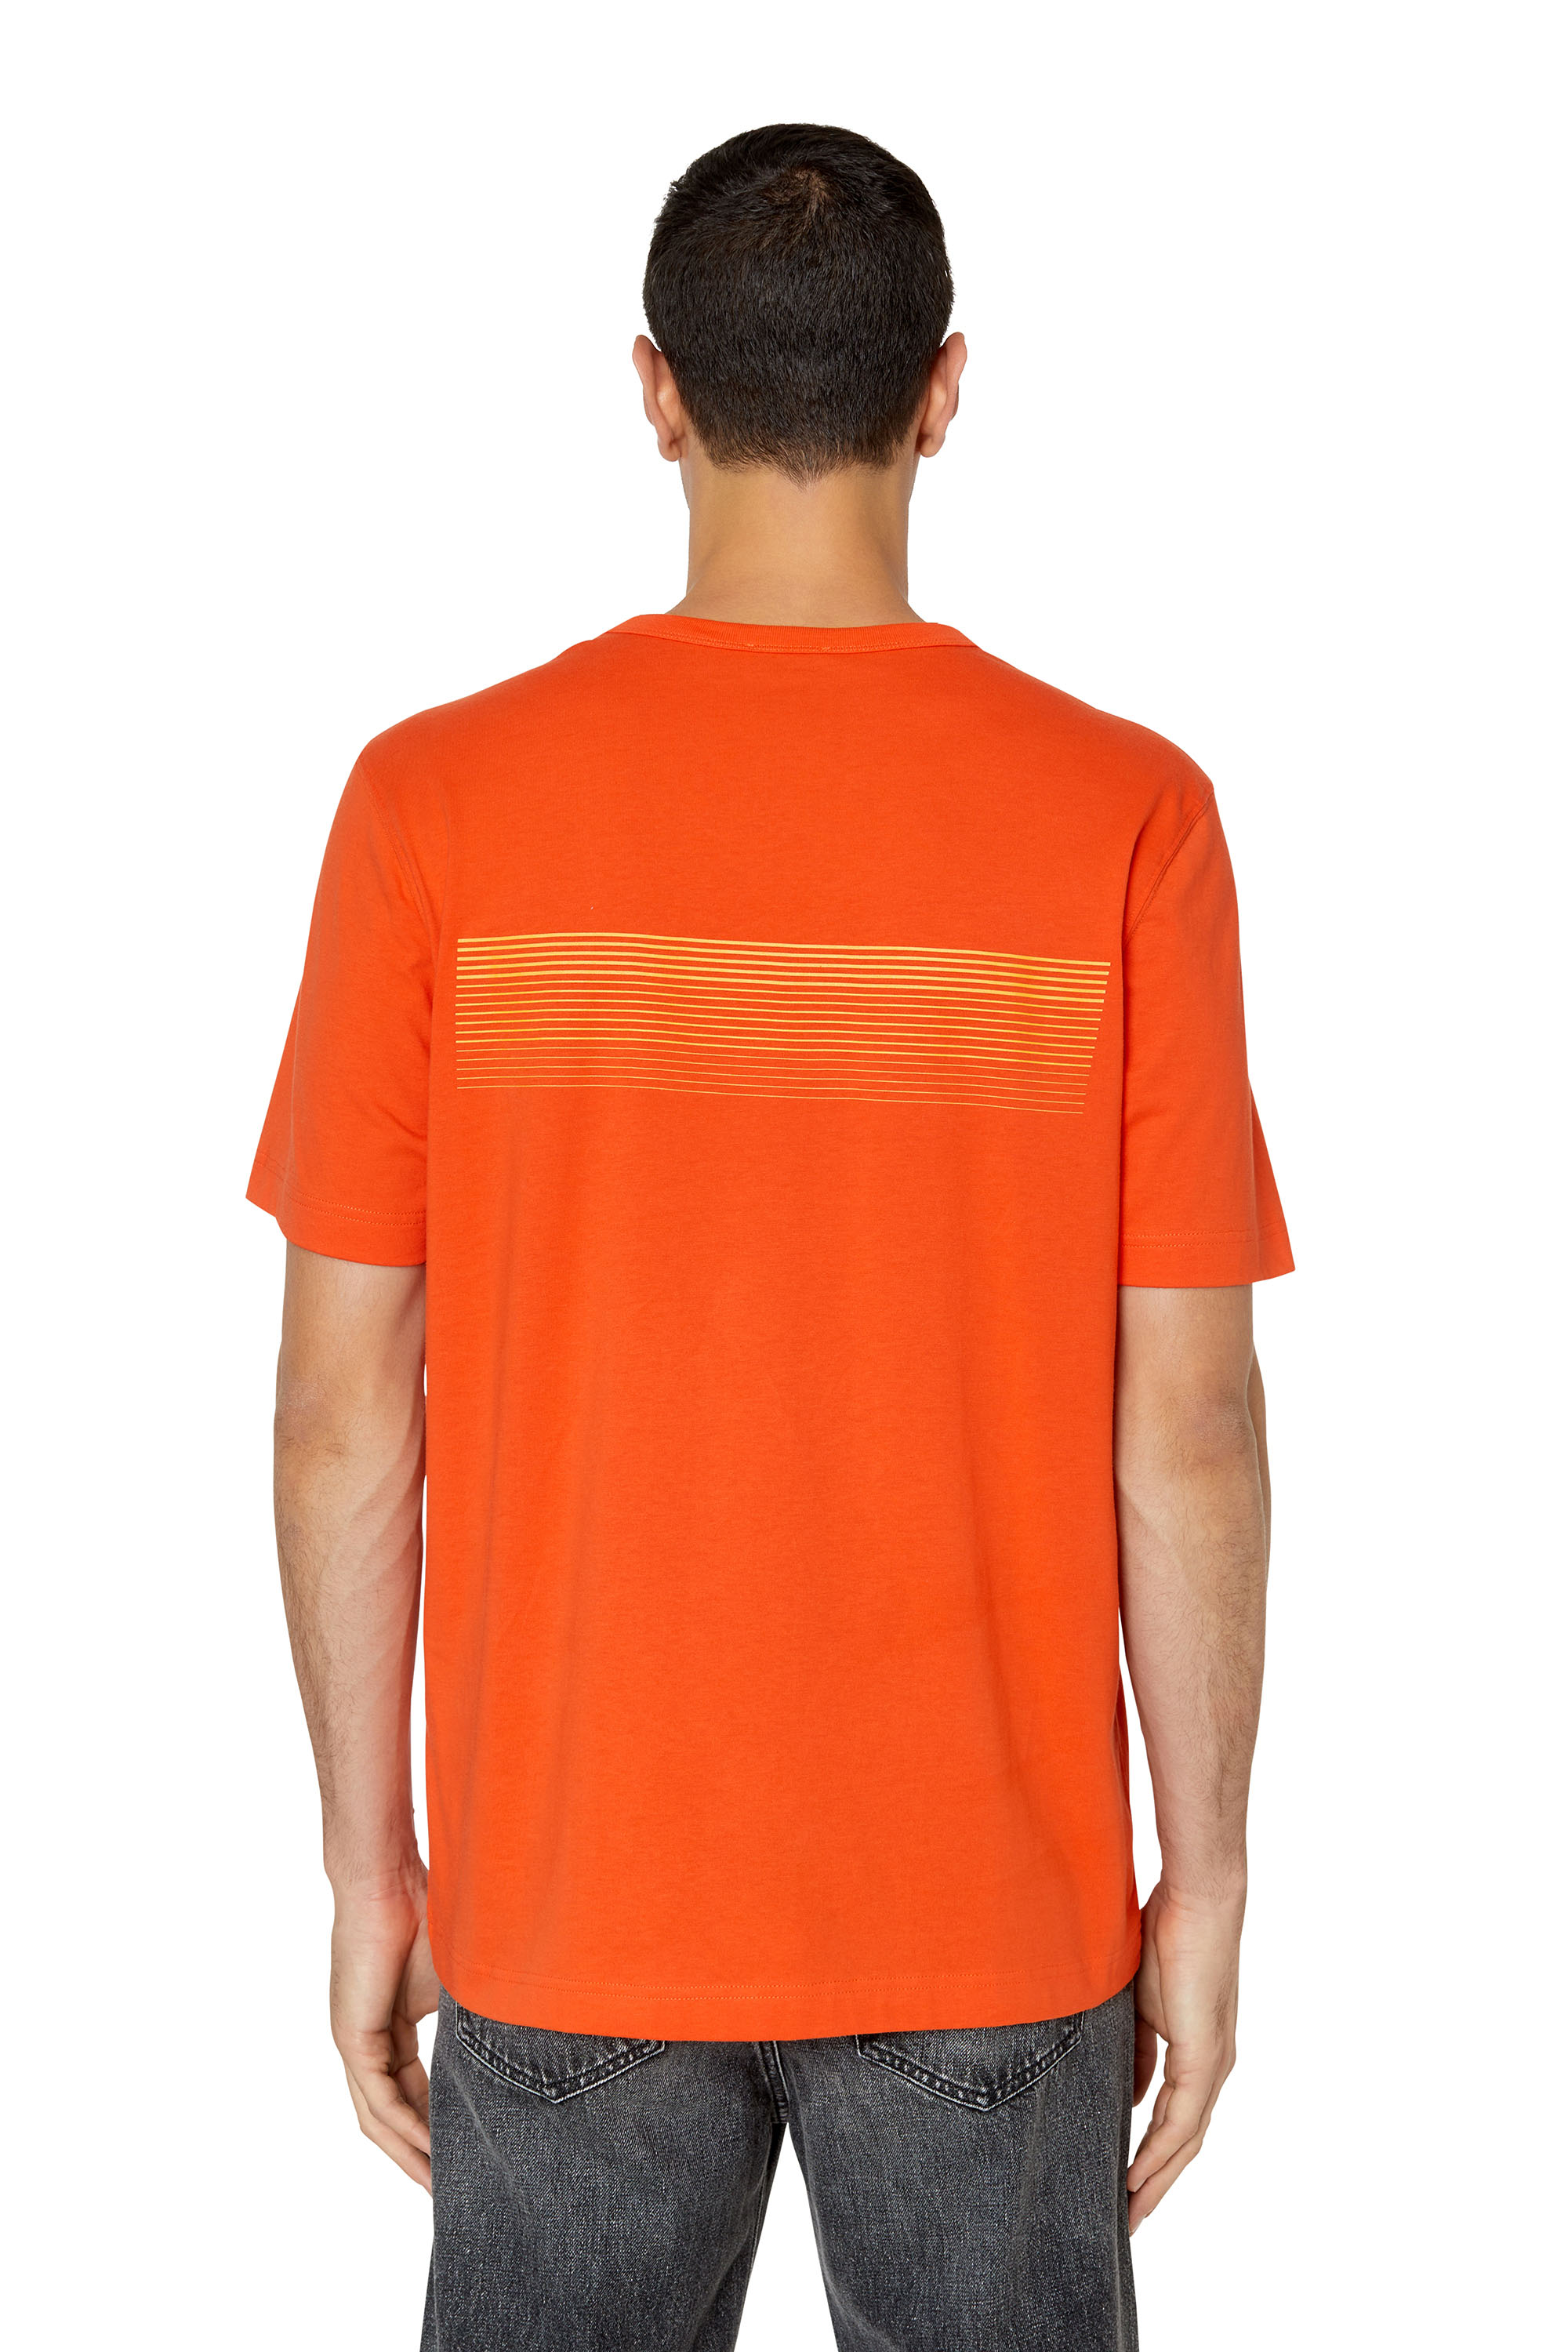 T-JUST-E19 Man: T-shirt with striped logo print | Diesel